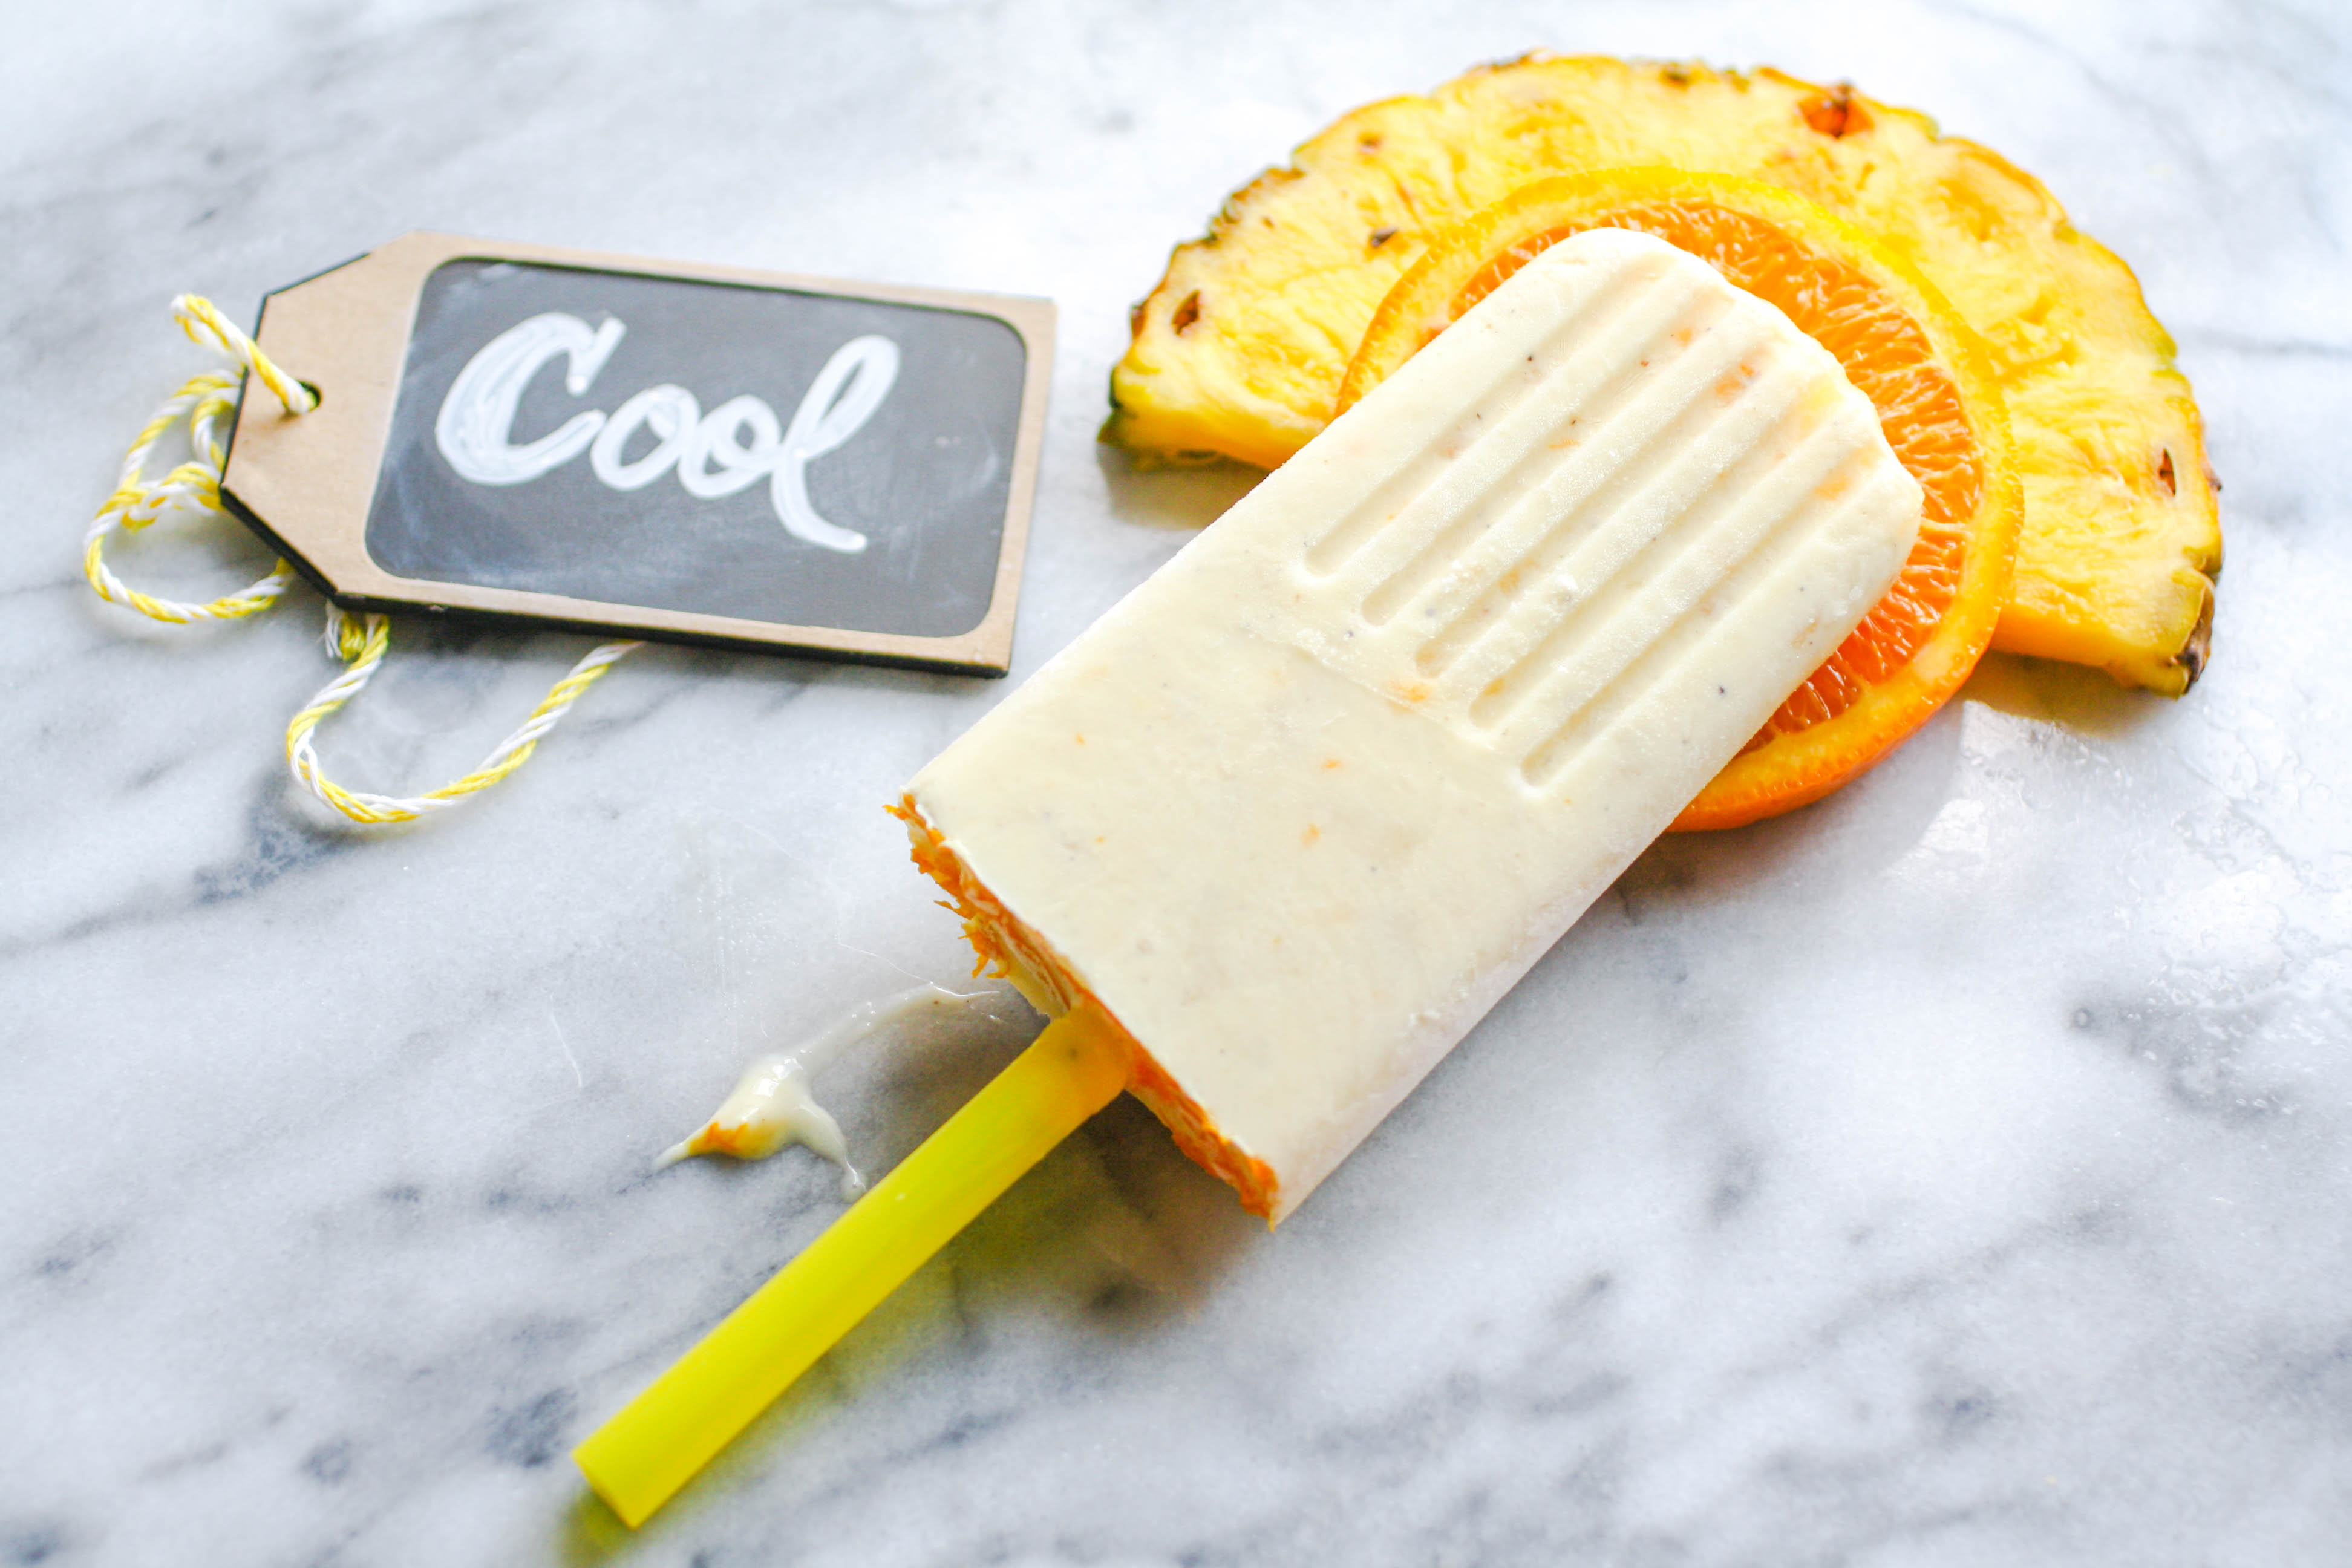 Pineapple-Orange & Cardamom Creamsicles are fun and easy to make for frosty fun! Pineapple-Orange & Cardamom Creamsicles are a delightful treat in the summer! Pineapple-Orange & Cardamom Creamsicles are frosty, fruity, and fun treats!